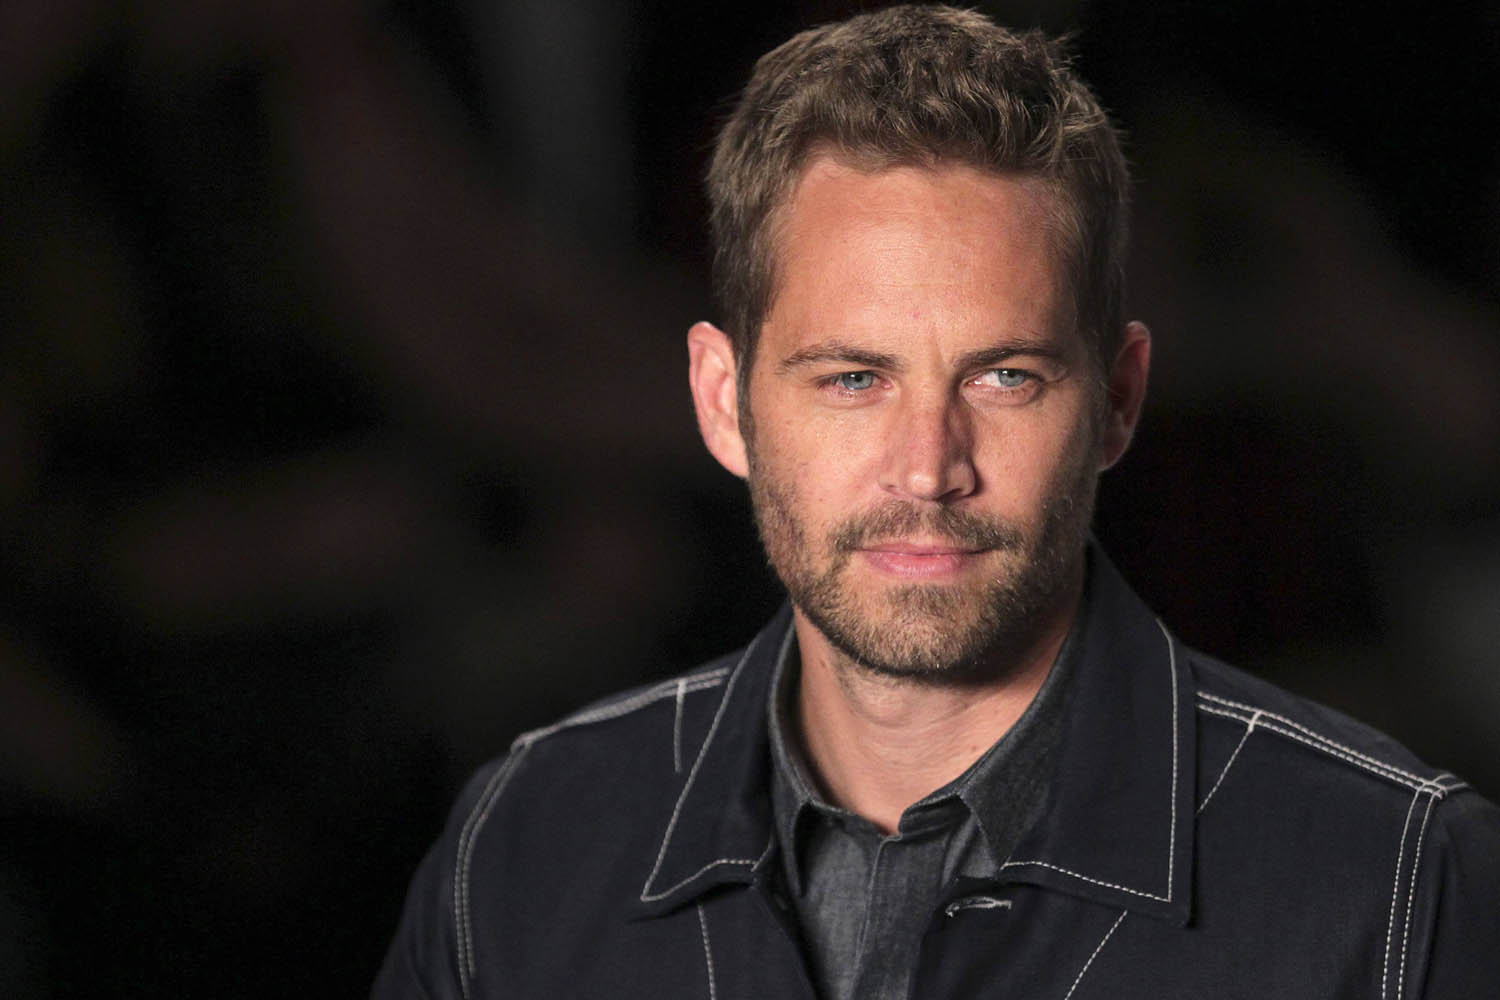 U.S. actor Paul Walker presents a creation during Sao Paulo Fashion Week in this file photo taken March 21, 2013. Walker, best known for his roles in the Fast and the Furious action movies, died on Saturday in a car crash in Southern California, his publicist said.  REUTERS/Filipe Carvalho/Files  (BRAZIL - Tags: OBITUARY ENTERTAINMENT)